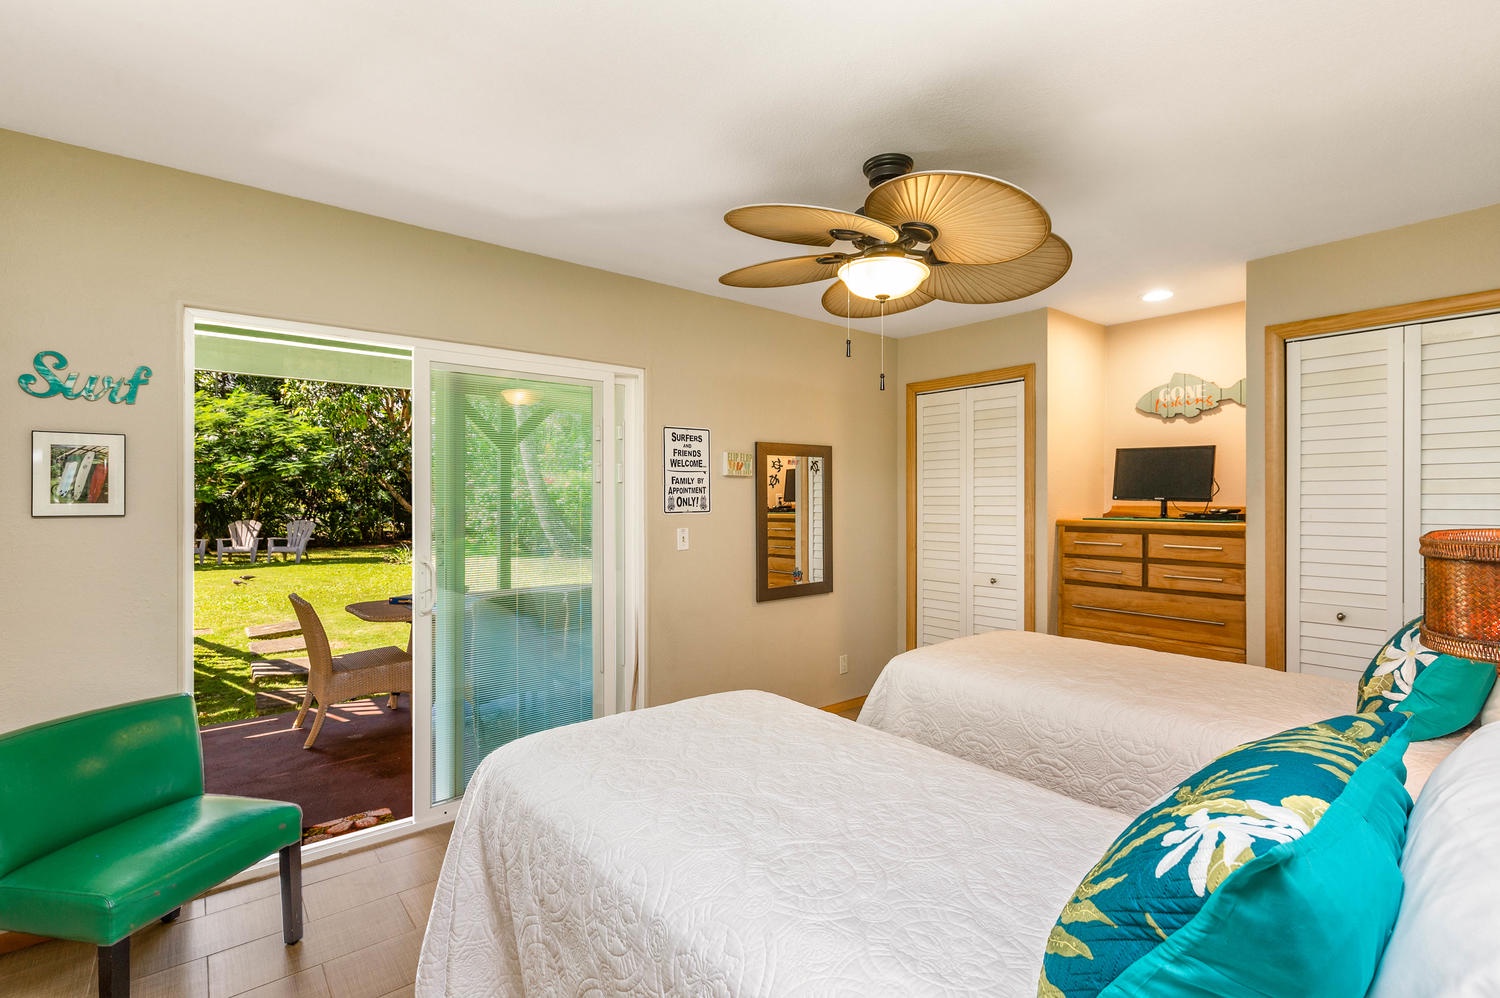 Princeville Vacation Rentals, Hale Anu Keanu - Downstairs twin bedroom